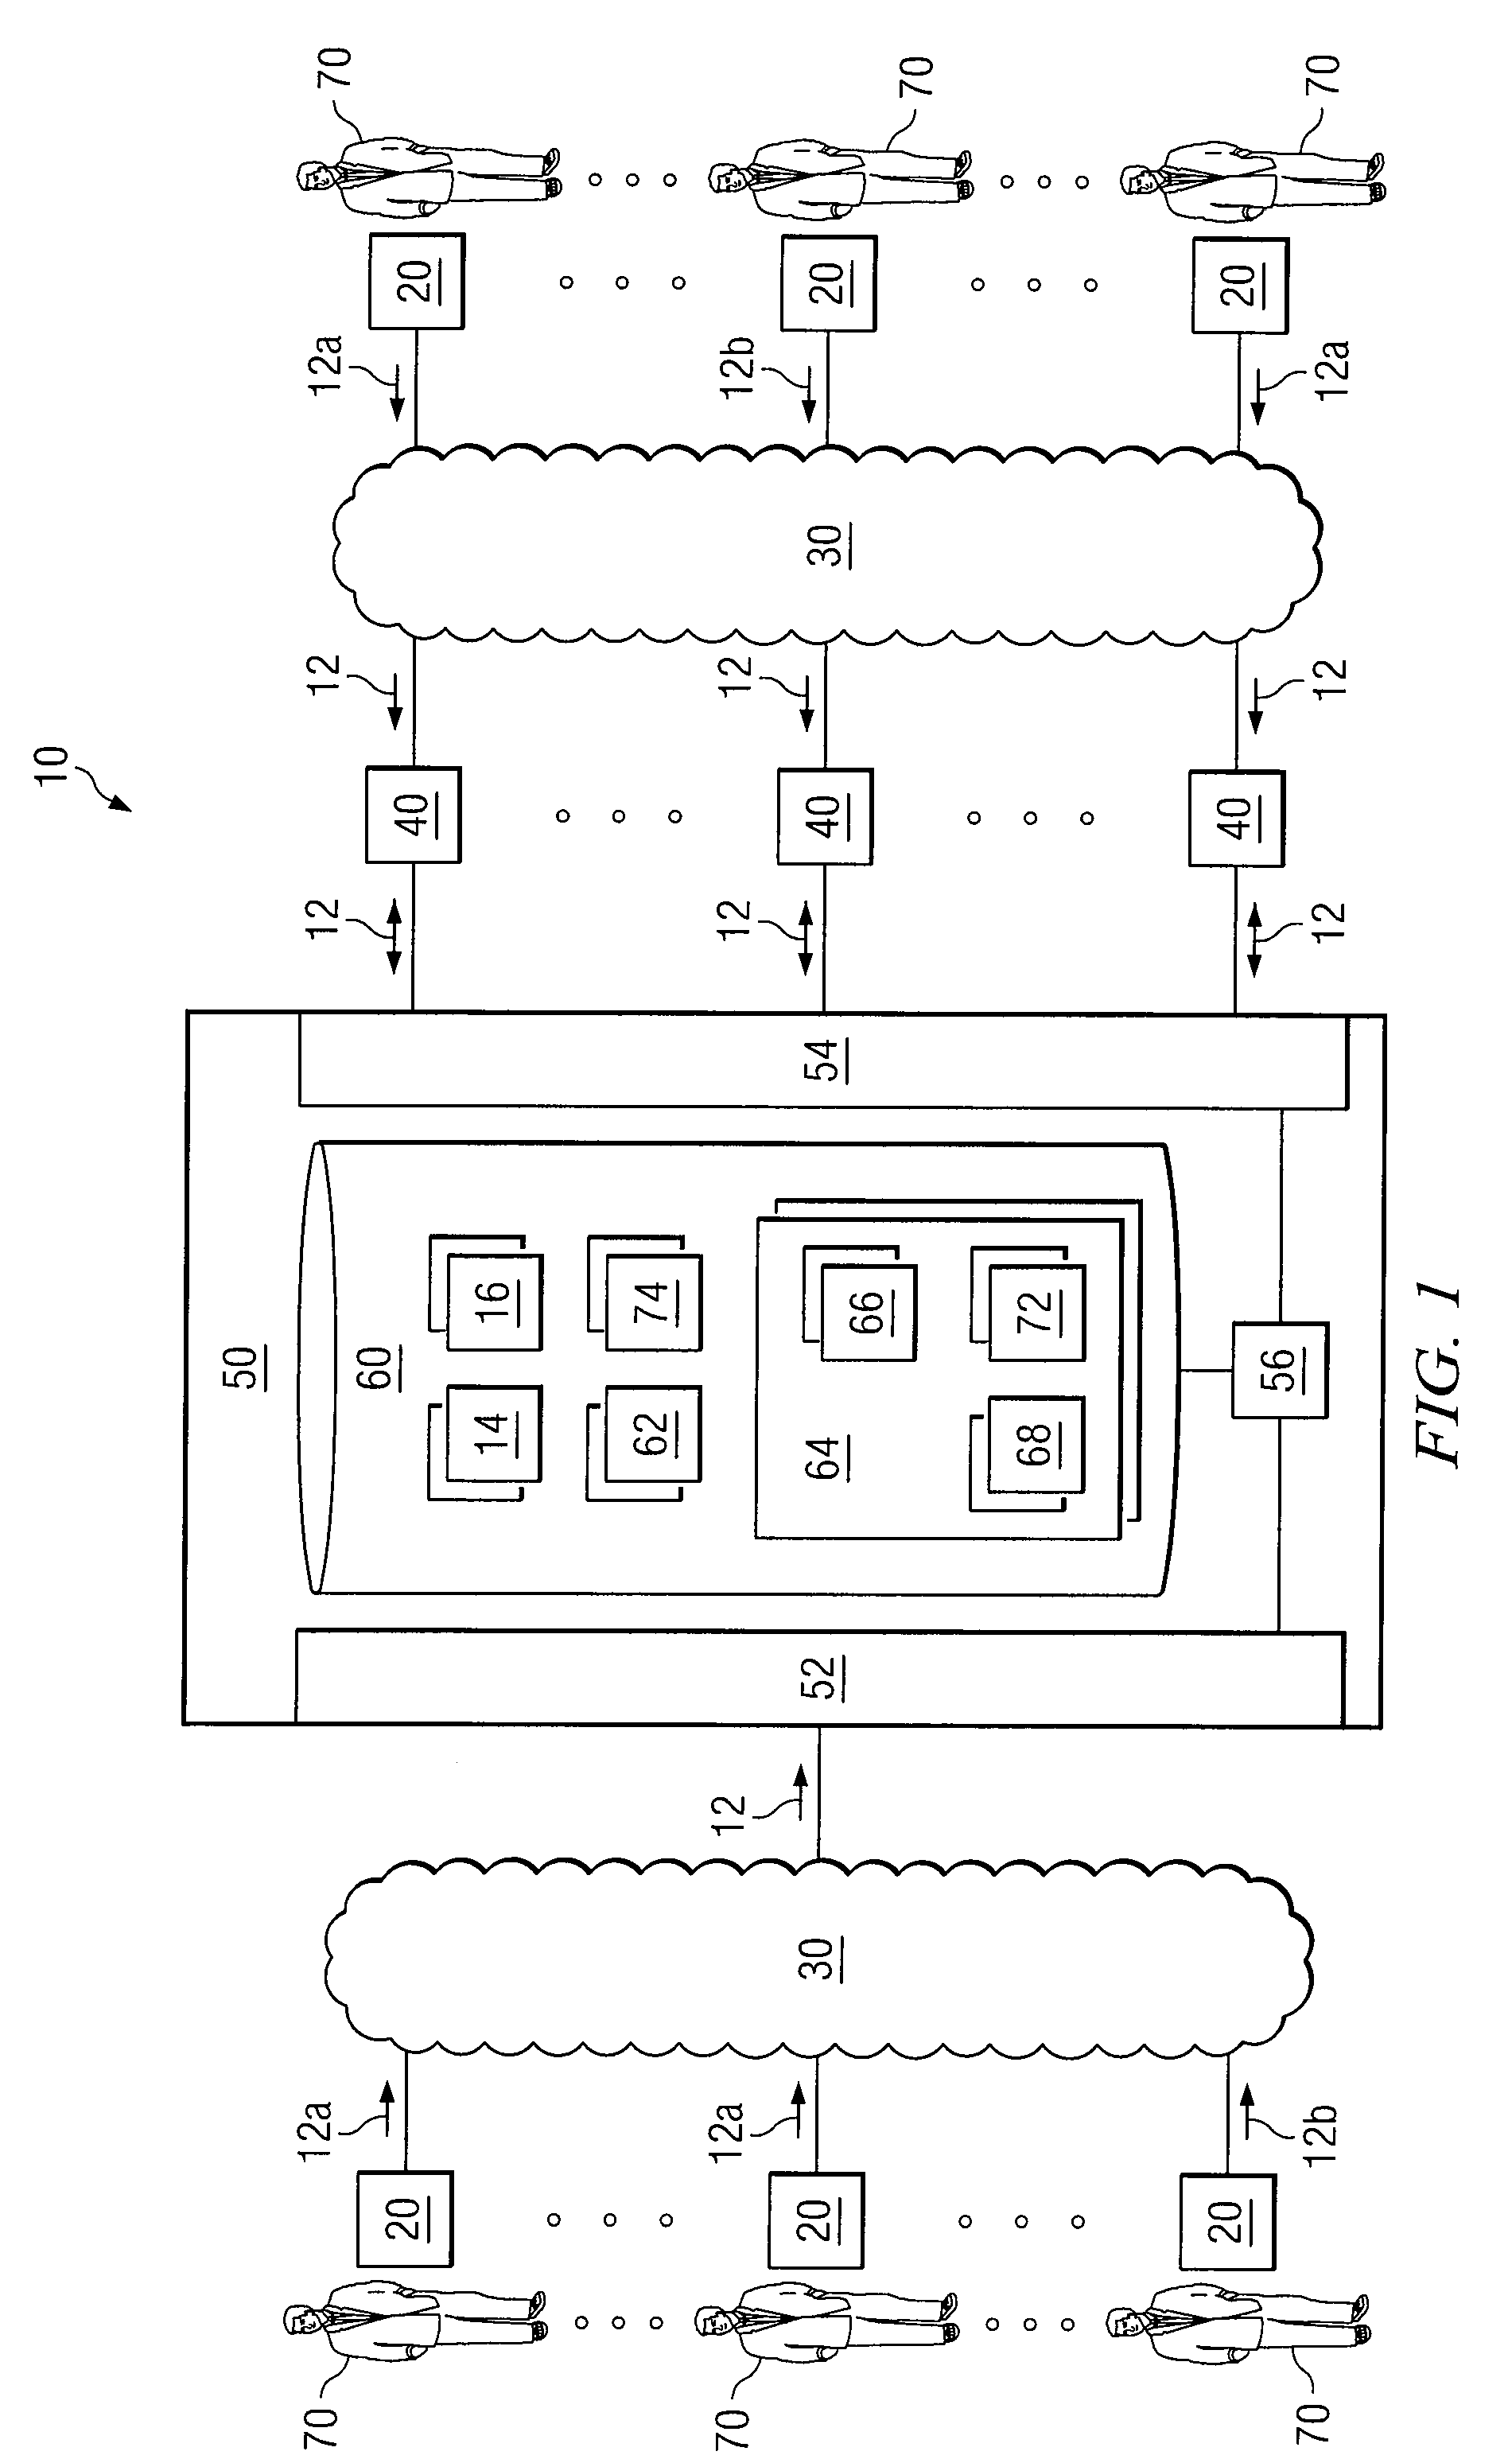 System and method for managing trading orders with decaying reserves